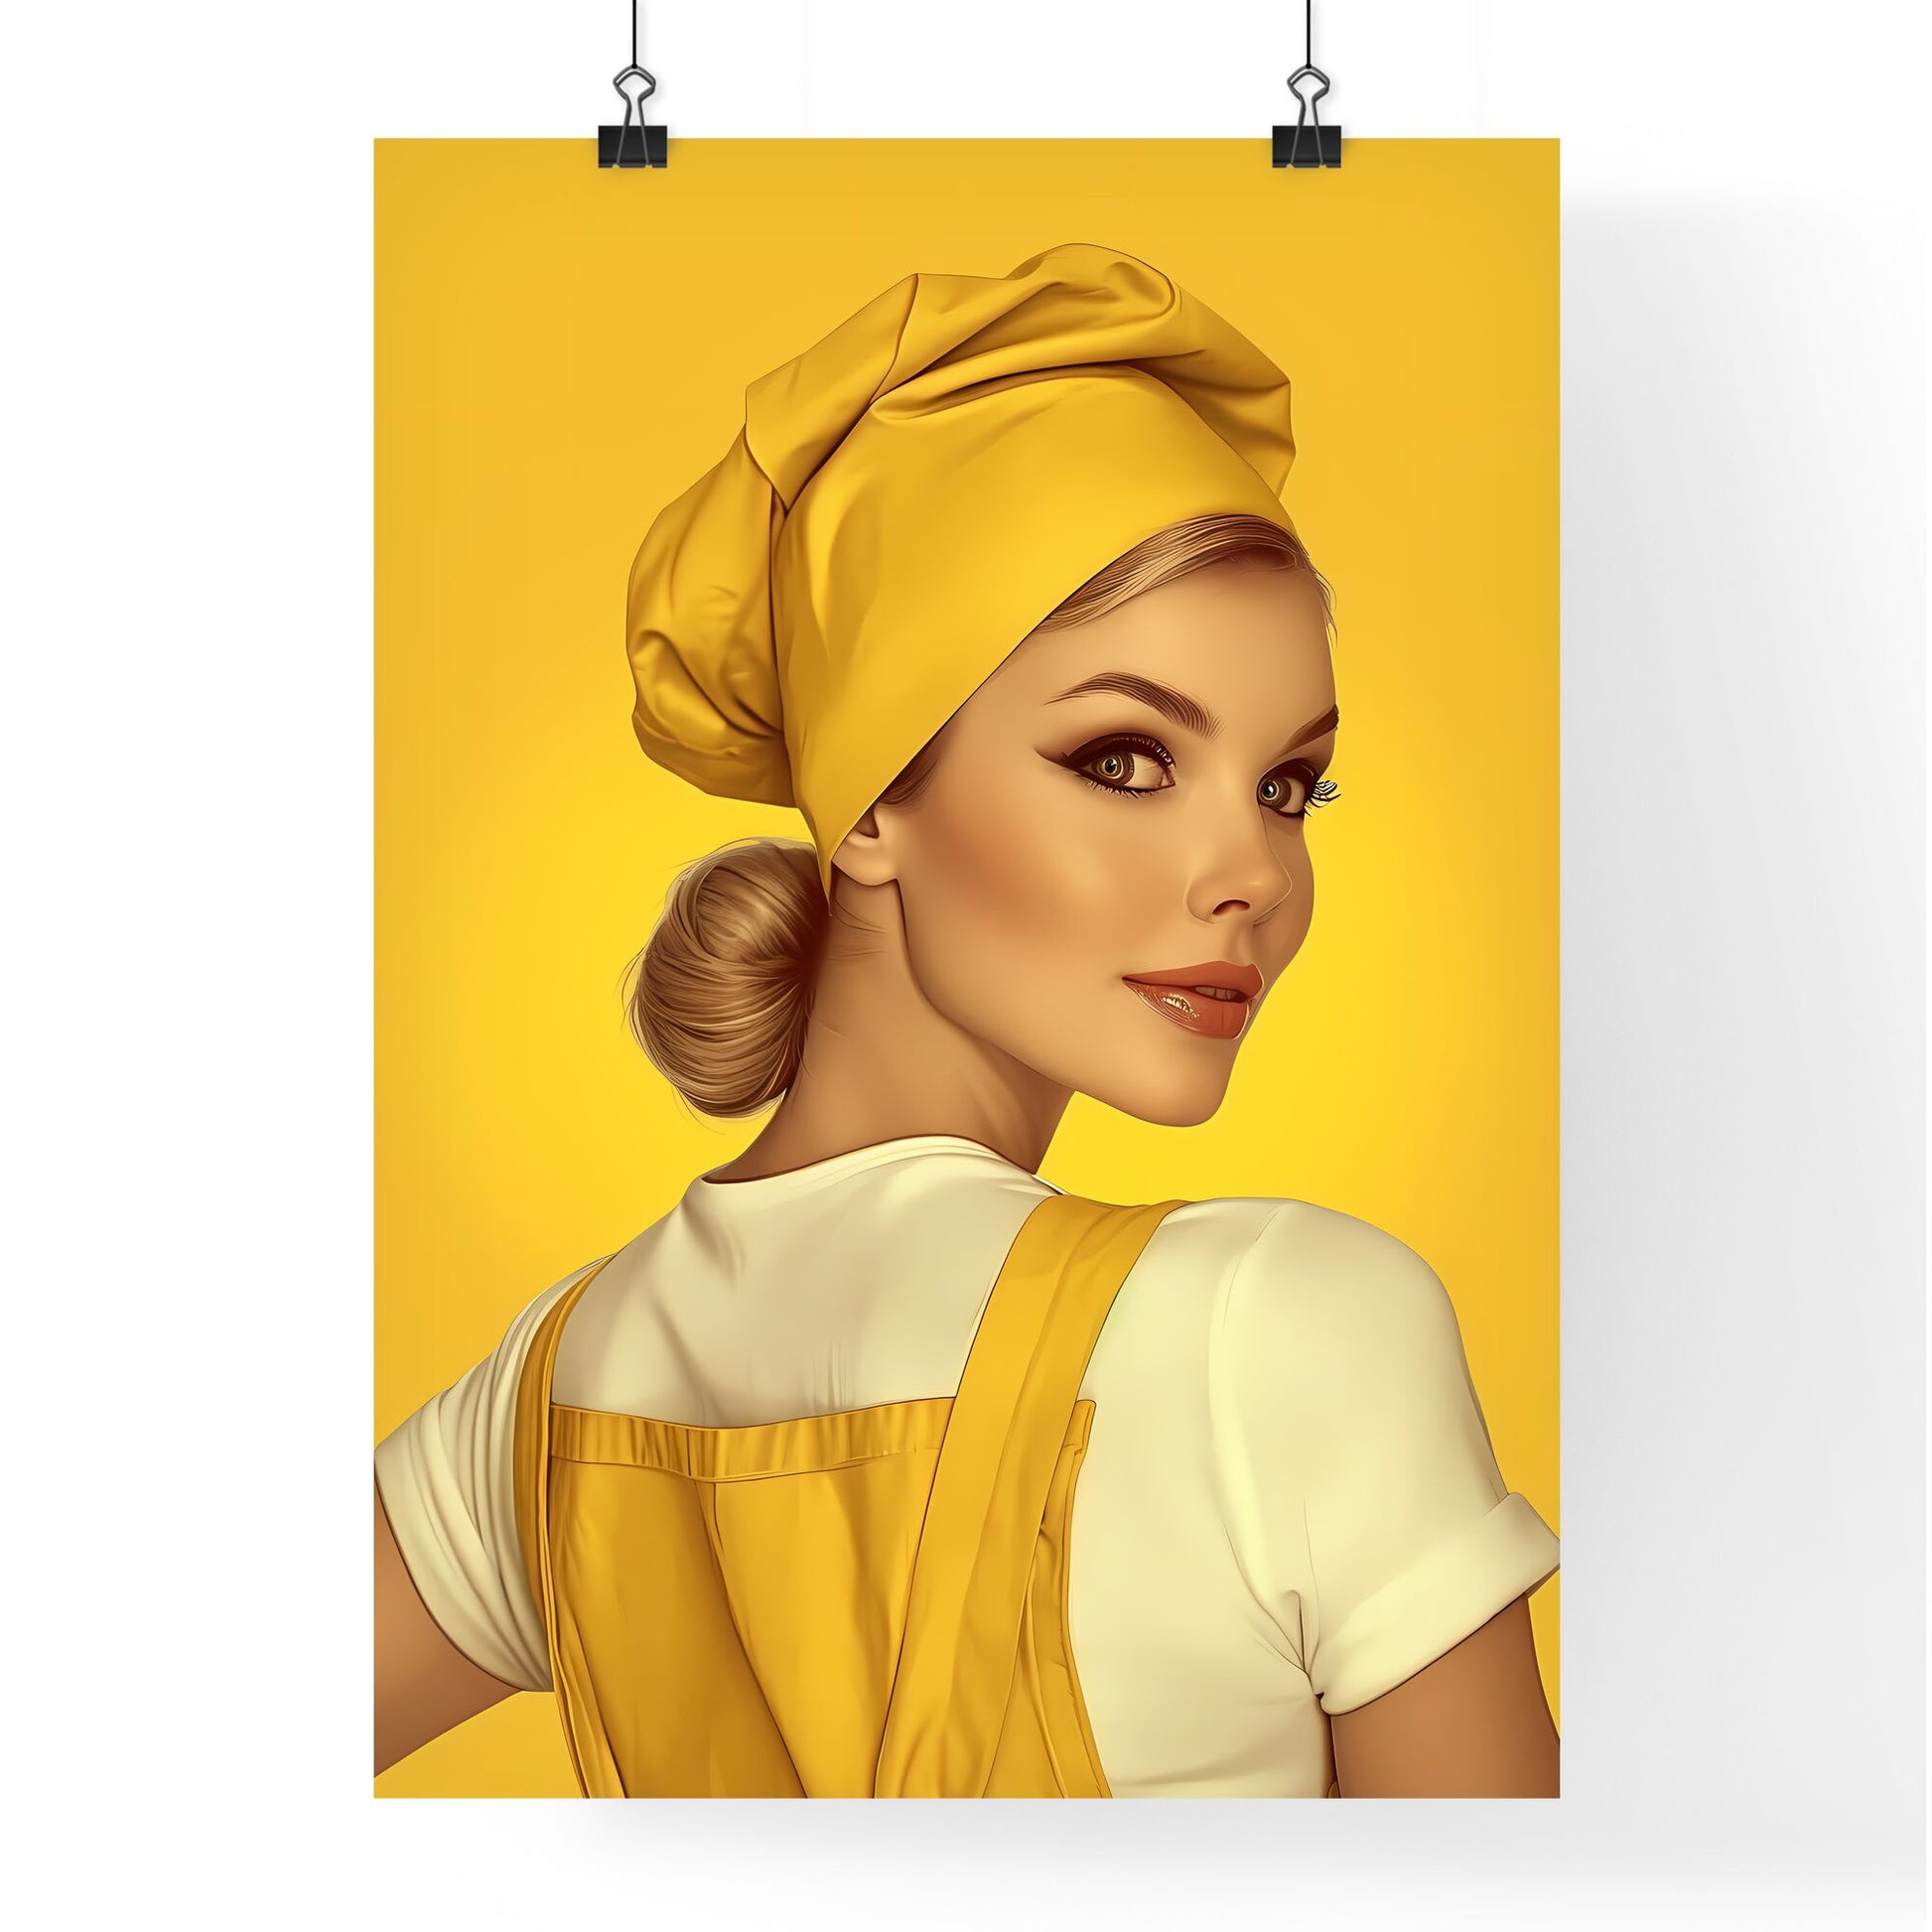 Amazing pin up girl illustration, full body character - Art print of a woman wearing a yellow apron and a yellow hat Default Title